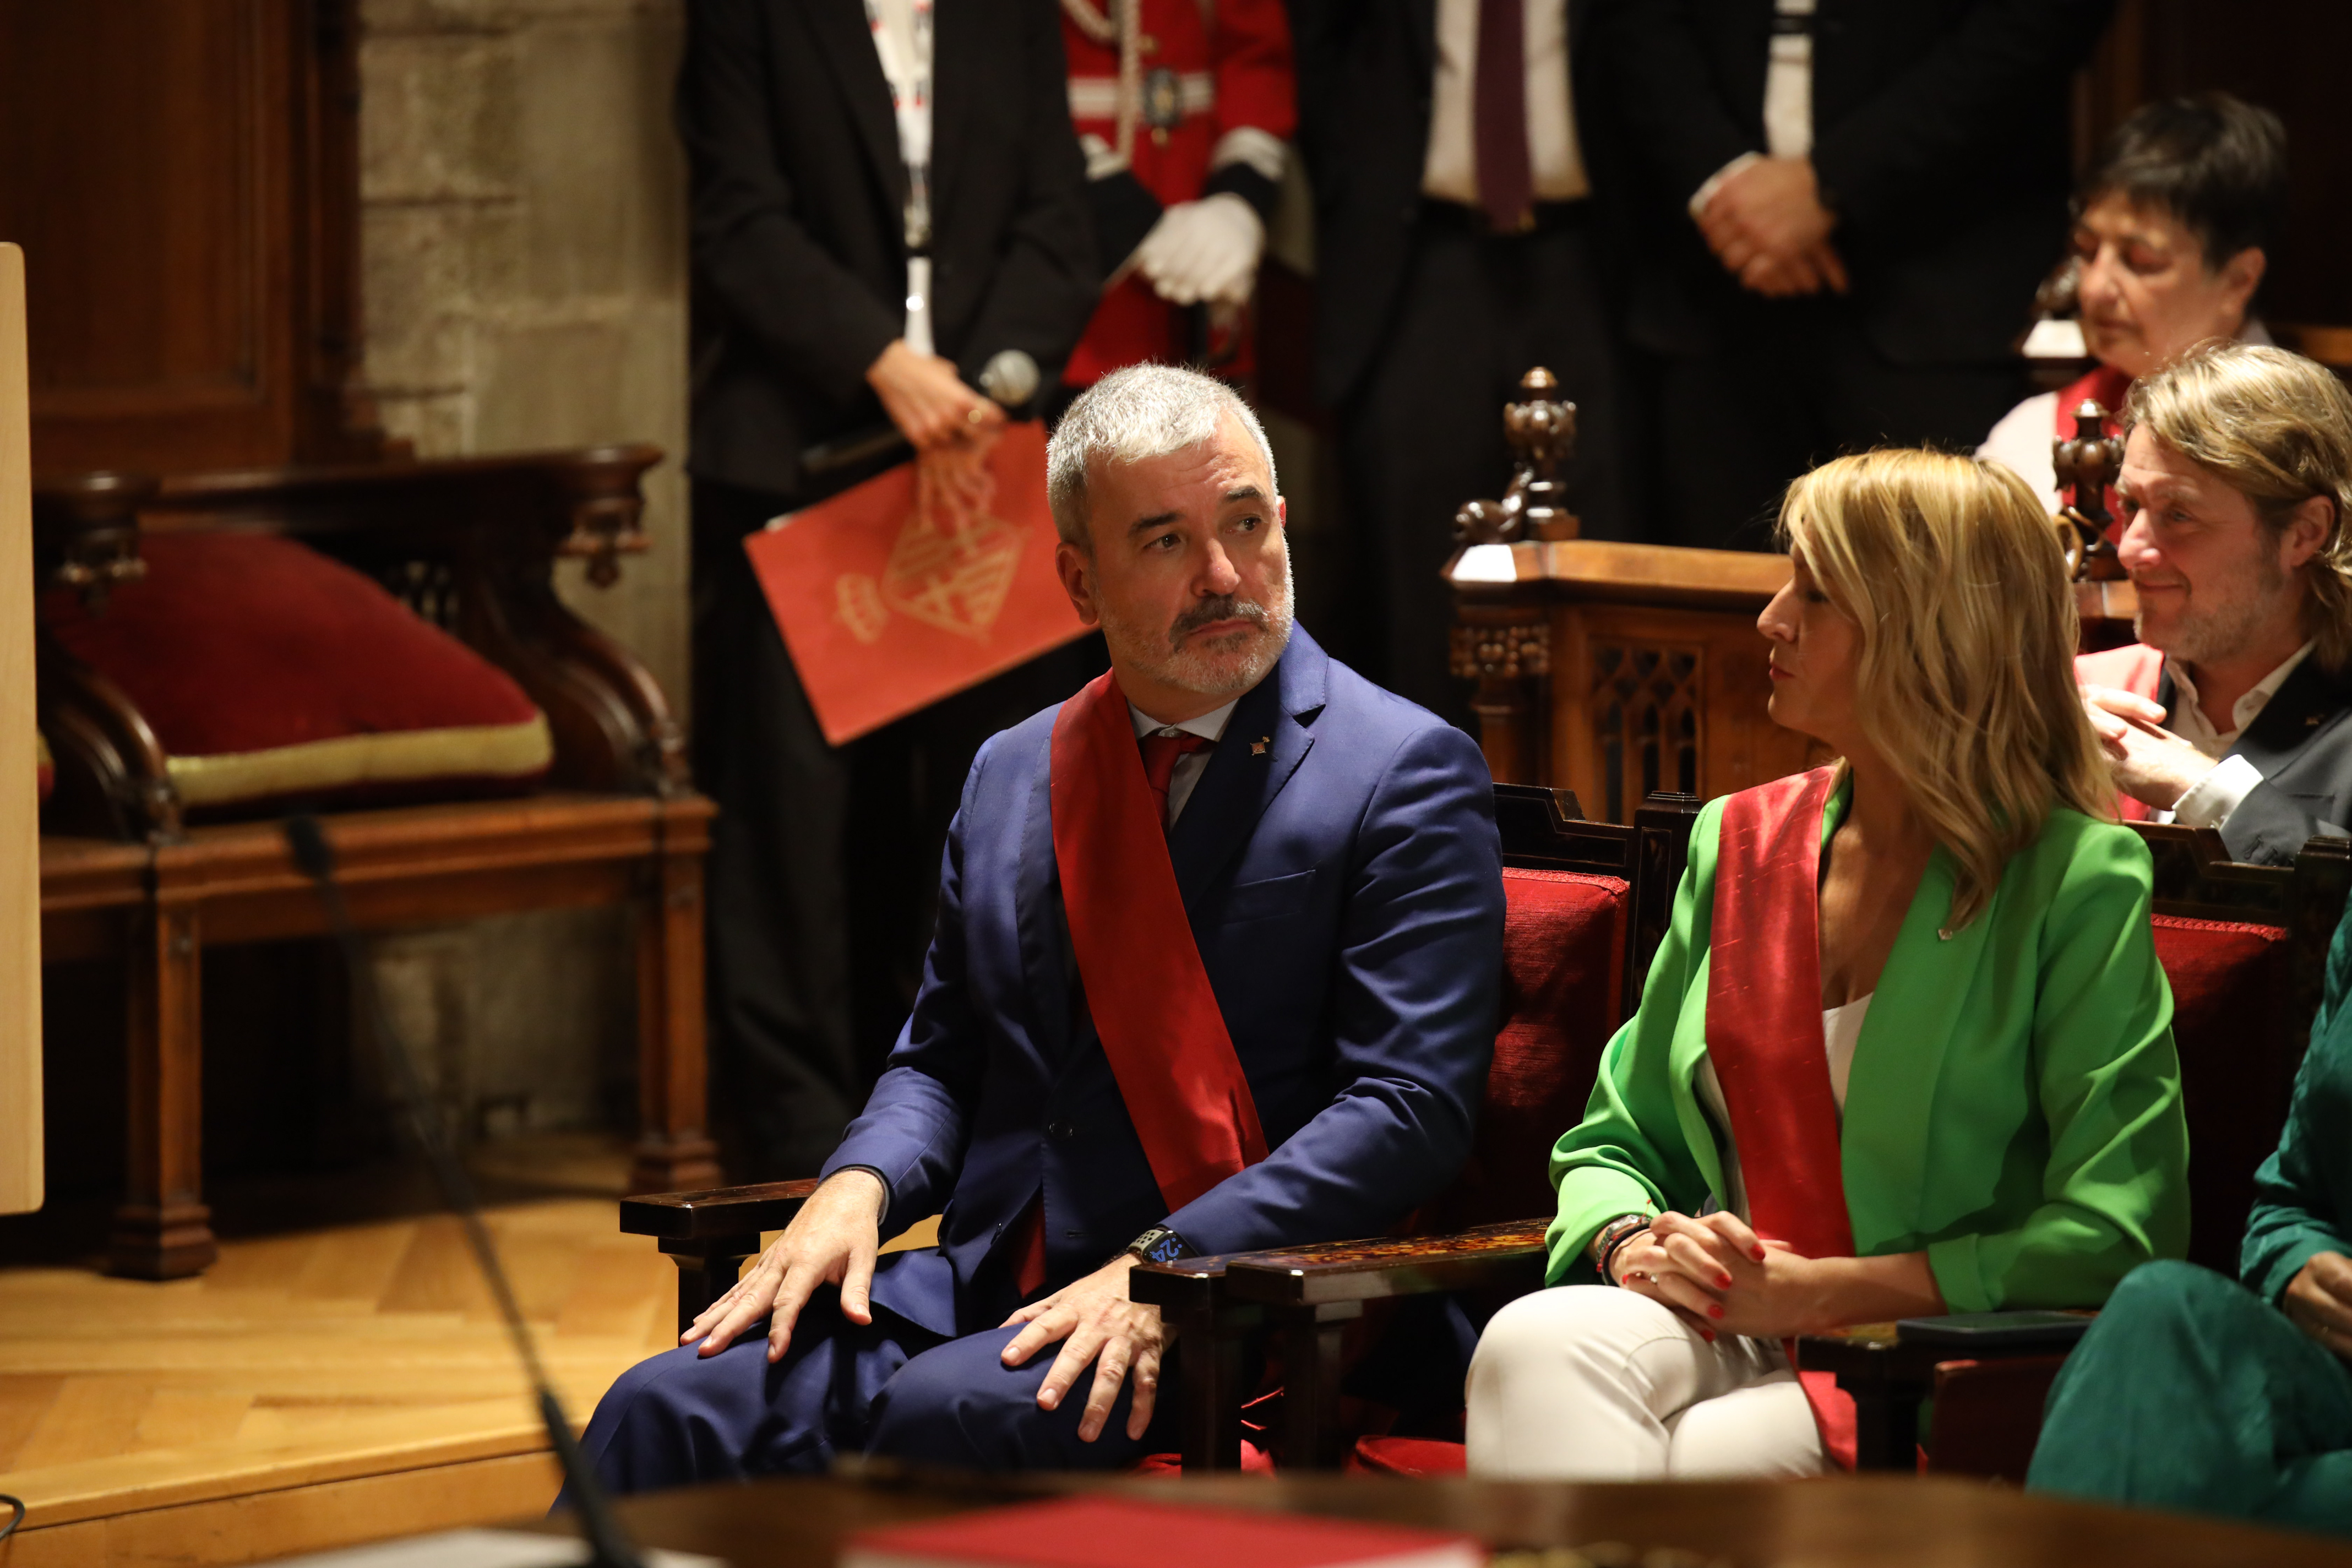 The Socialist Barcelona mayoral candidate, Jaume Collboni, during the opening session of the 2023-2027 term